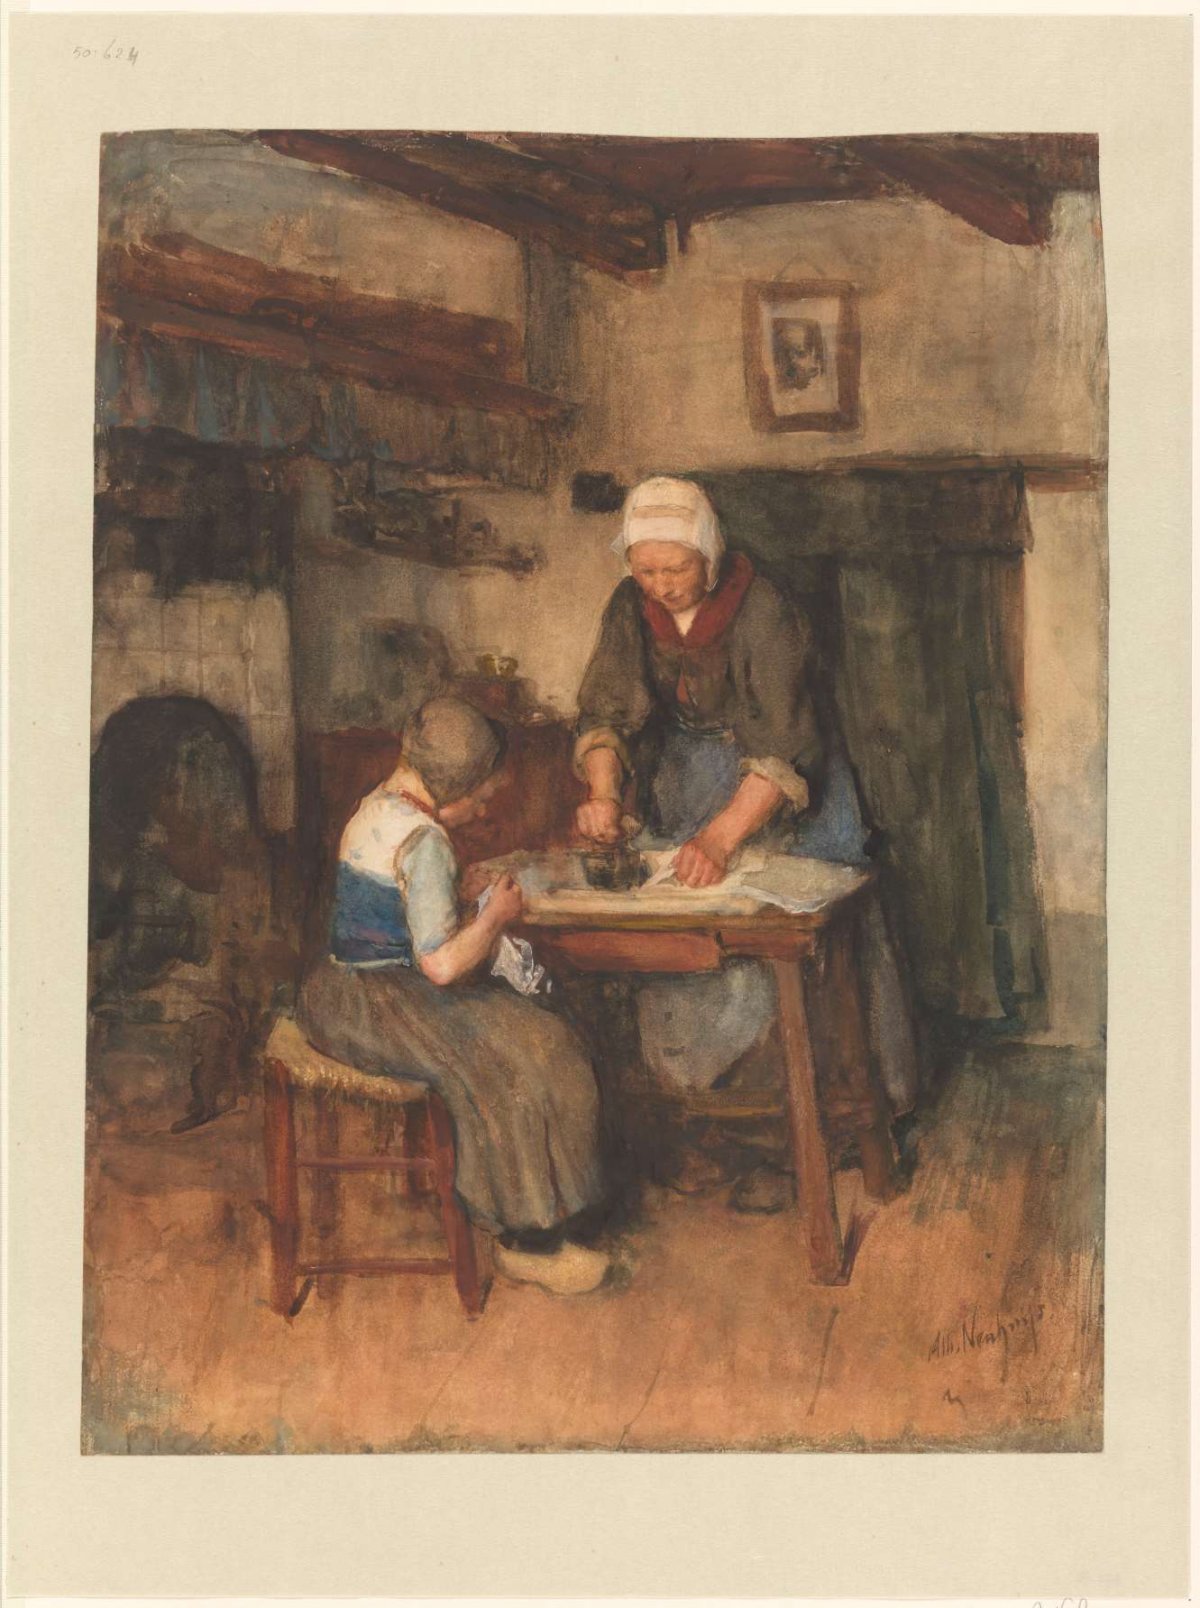 Interior with ironing woman and sewing child, Albert Neuhuys (1844-1914), 1854 - 1914